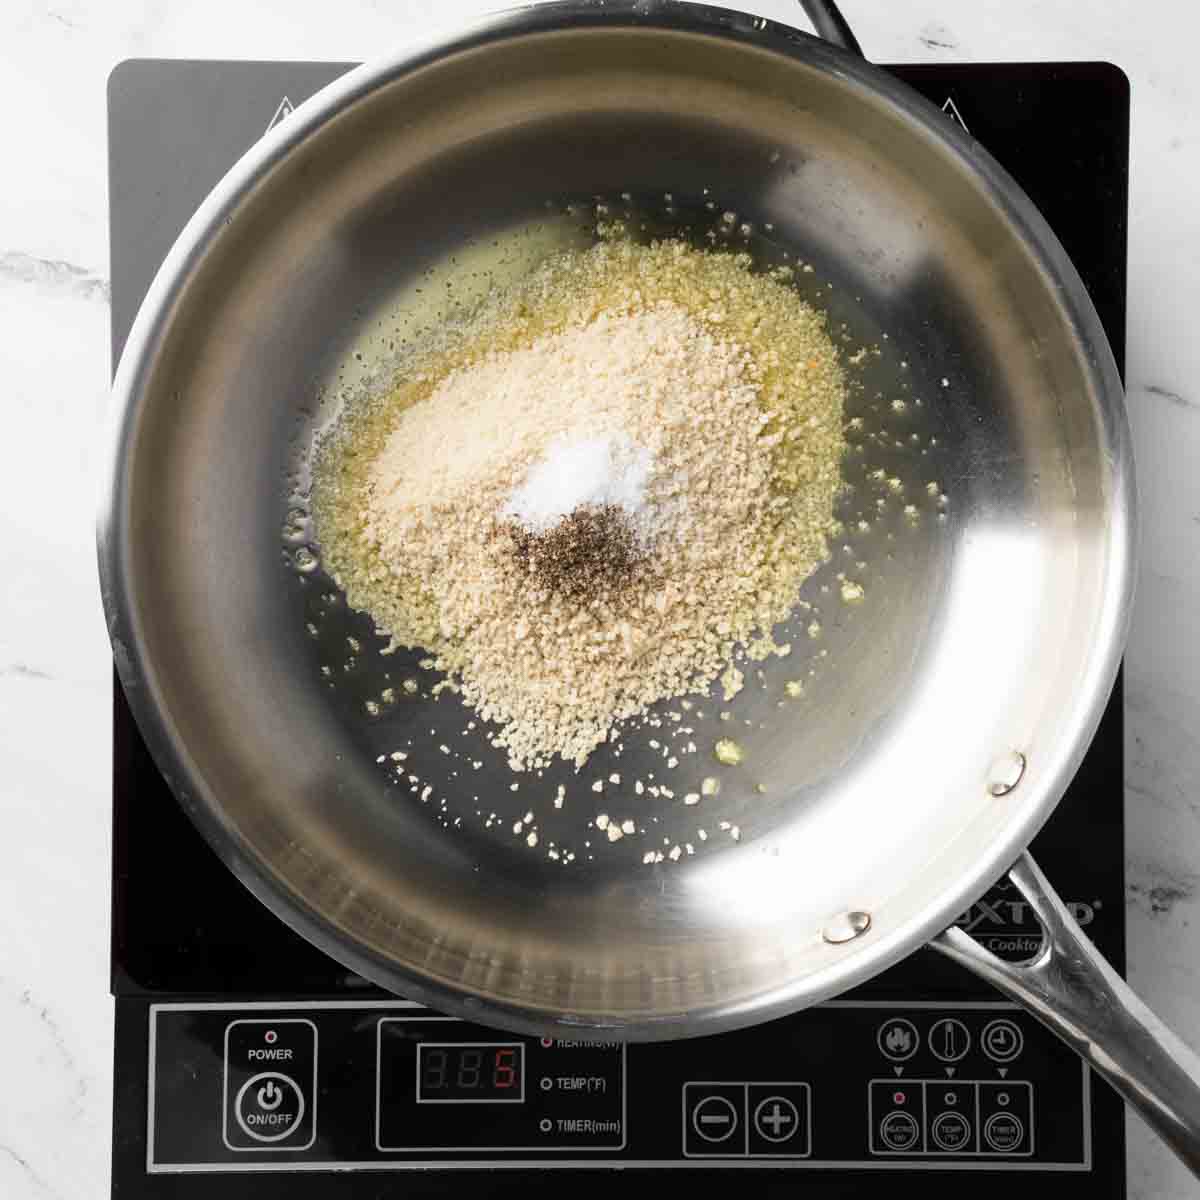 Olive oil, panic breadcrumbs, salt and pepper in a frying pan.